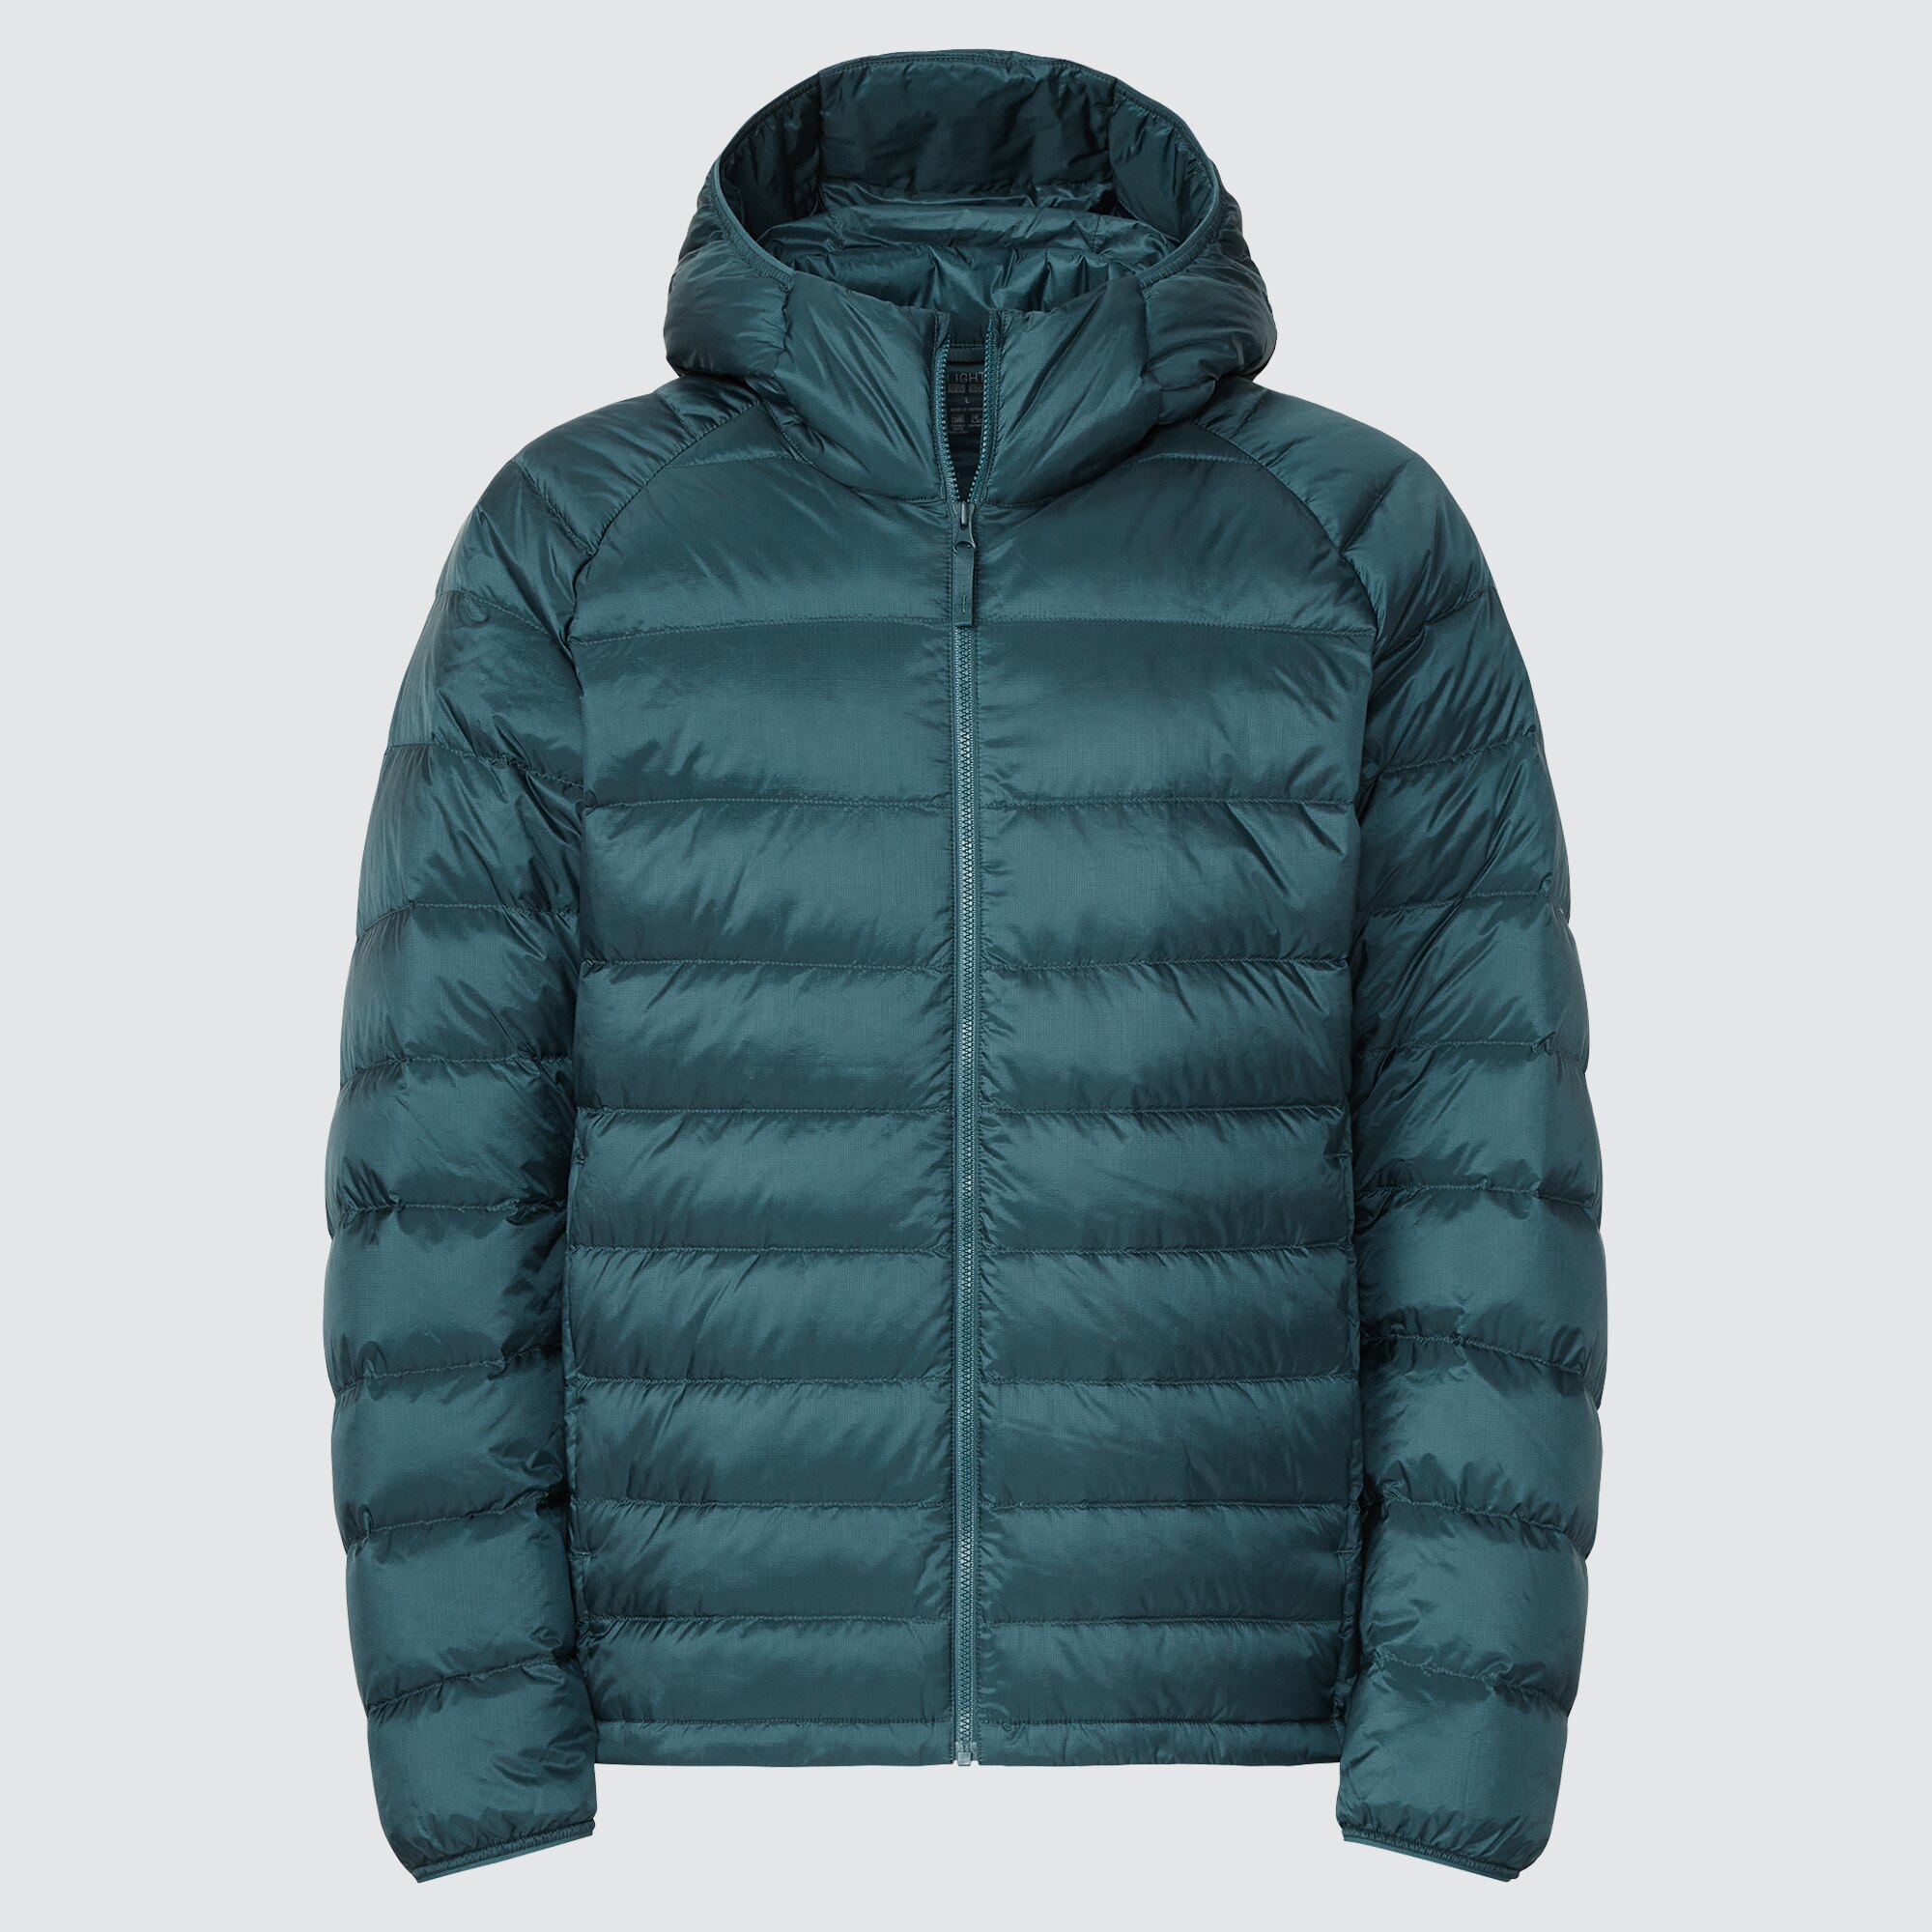 Uniqlo Ultra Light Down Jacket The Perfect Travel Jacket  The Wildest  Road